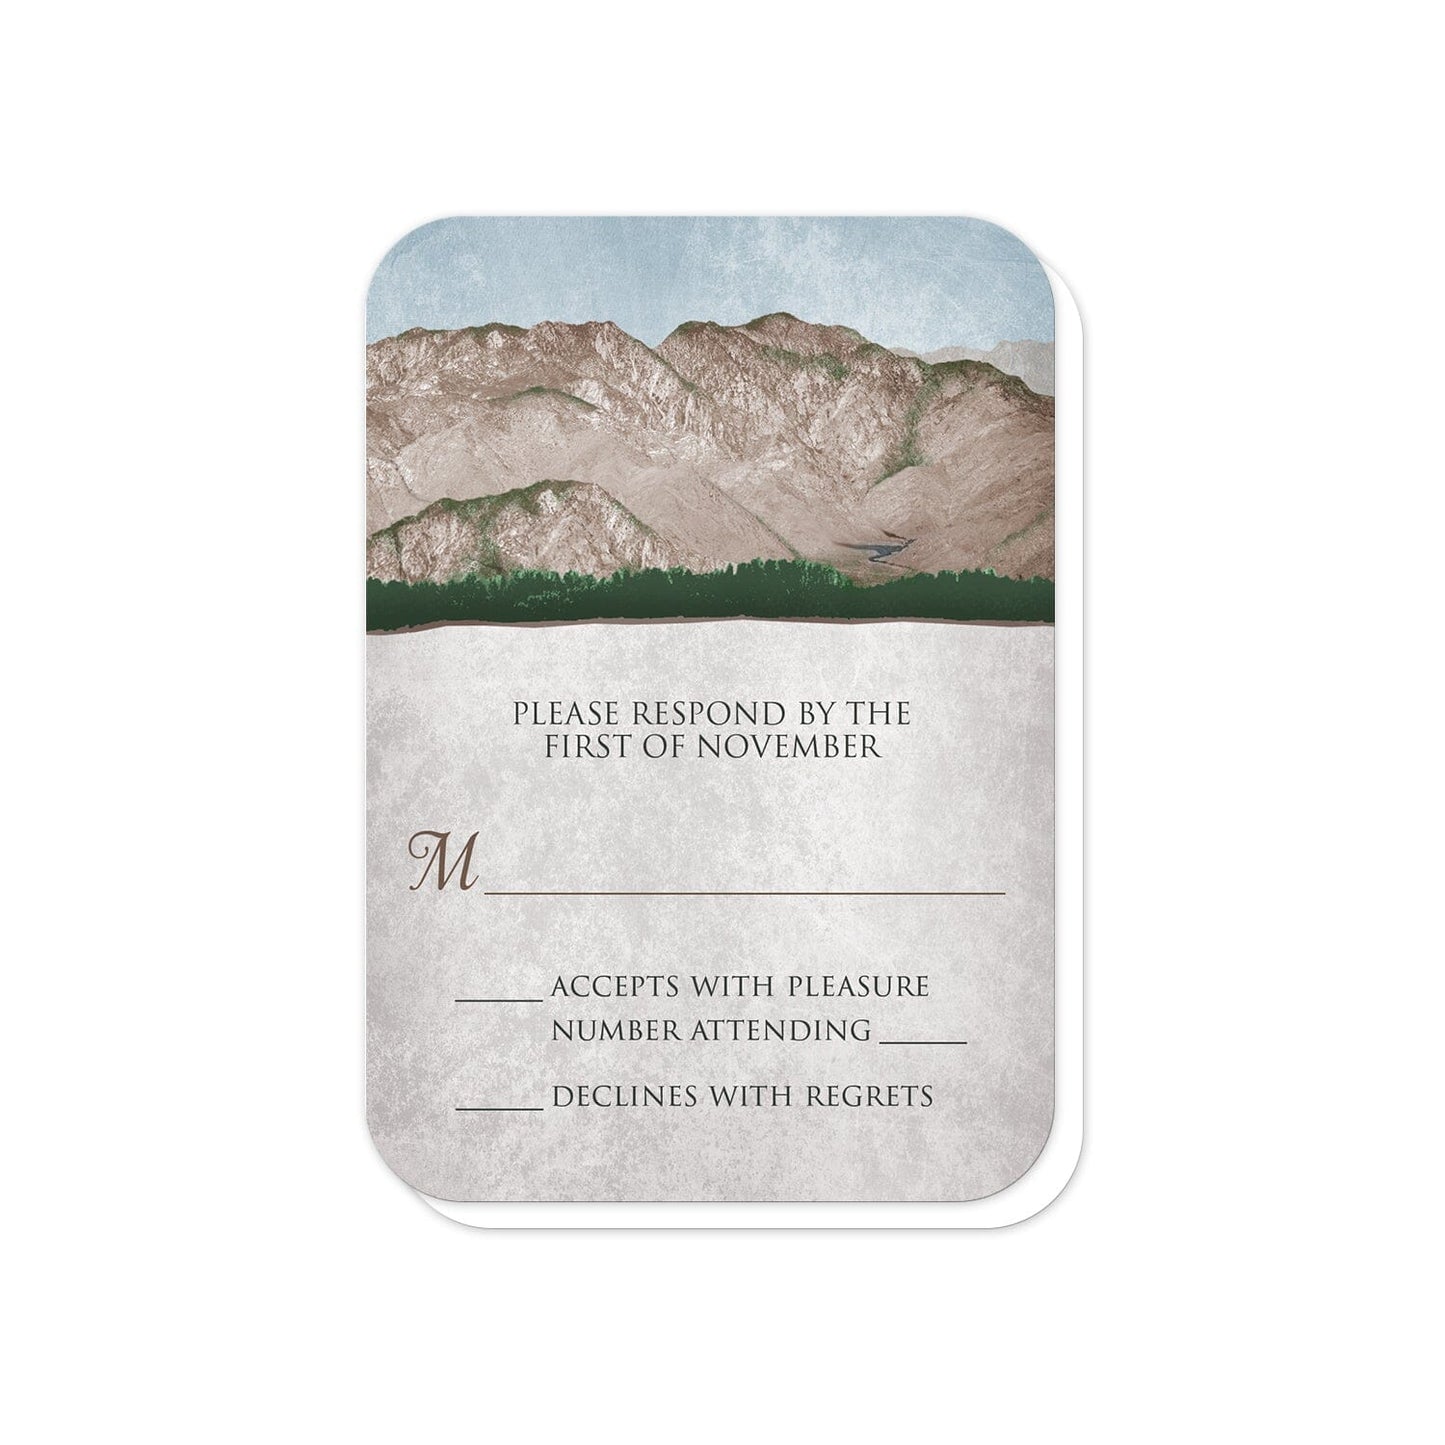 Rustic Mountain Scene RSVP Cards (rounded corners) at Artistically Invited.